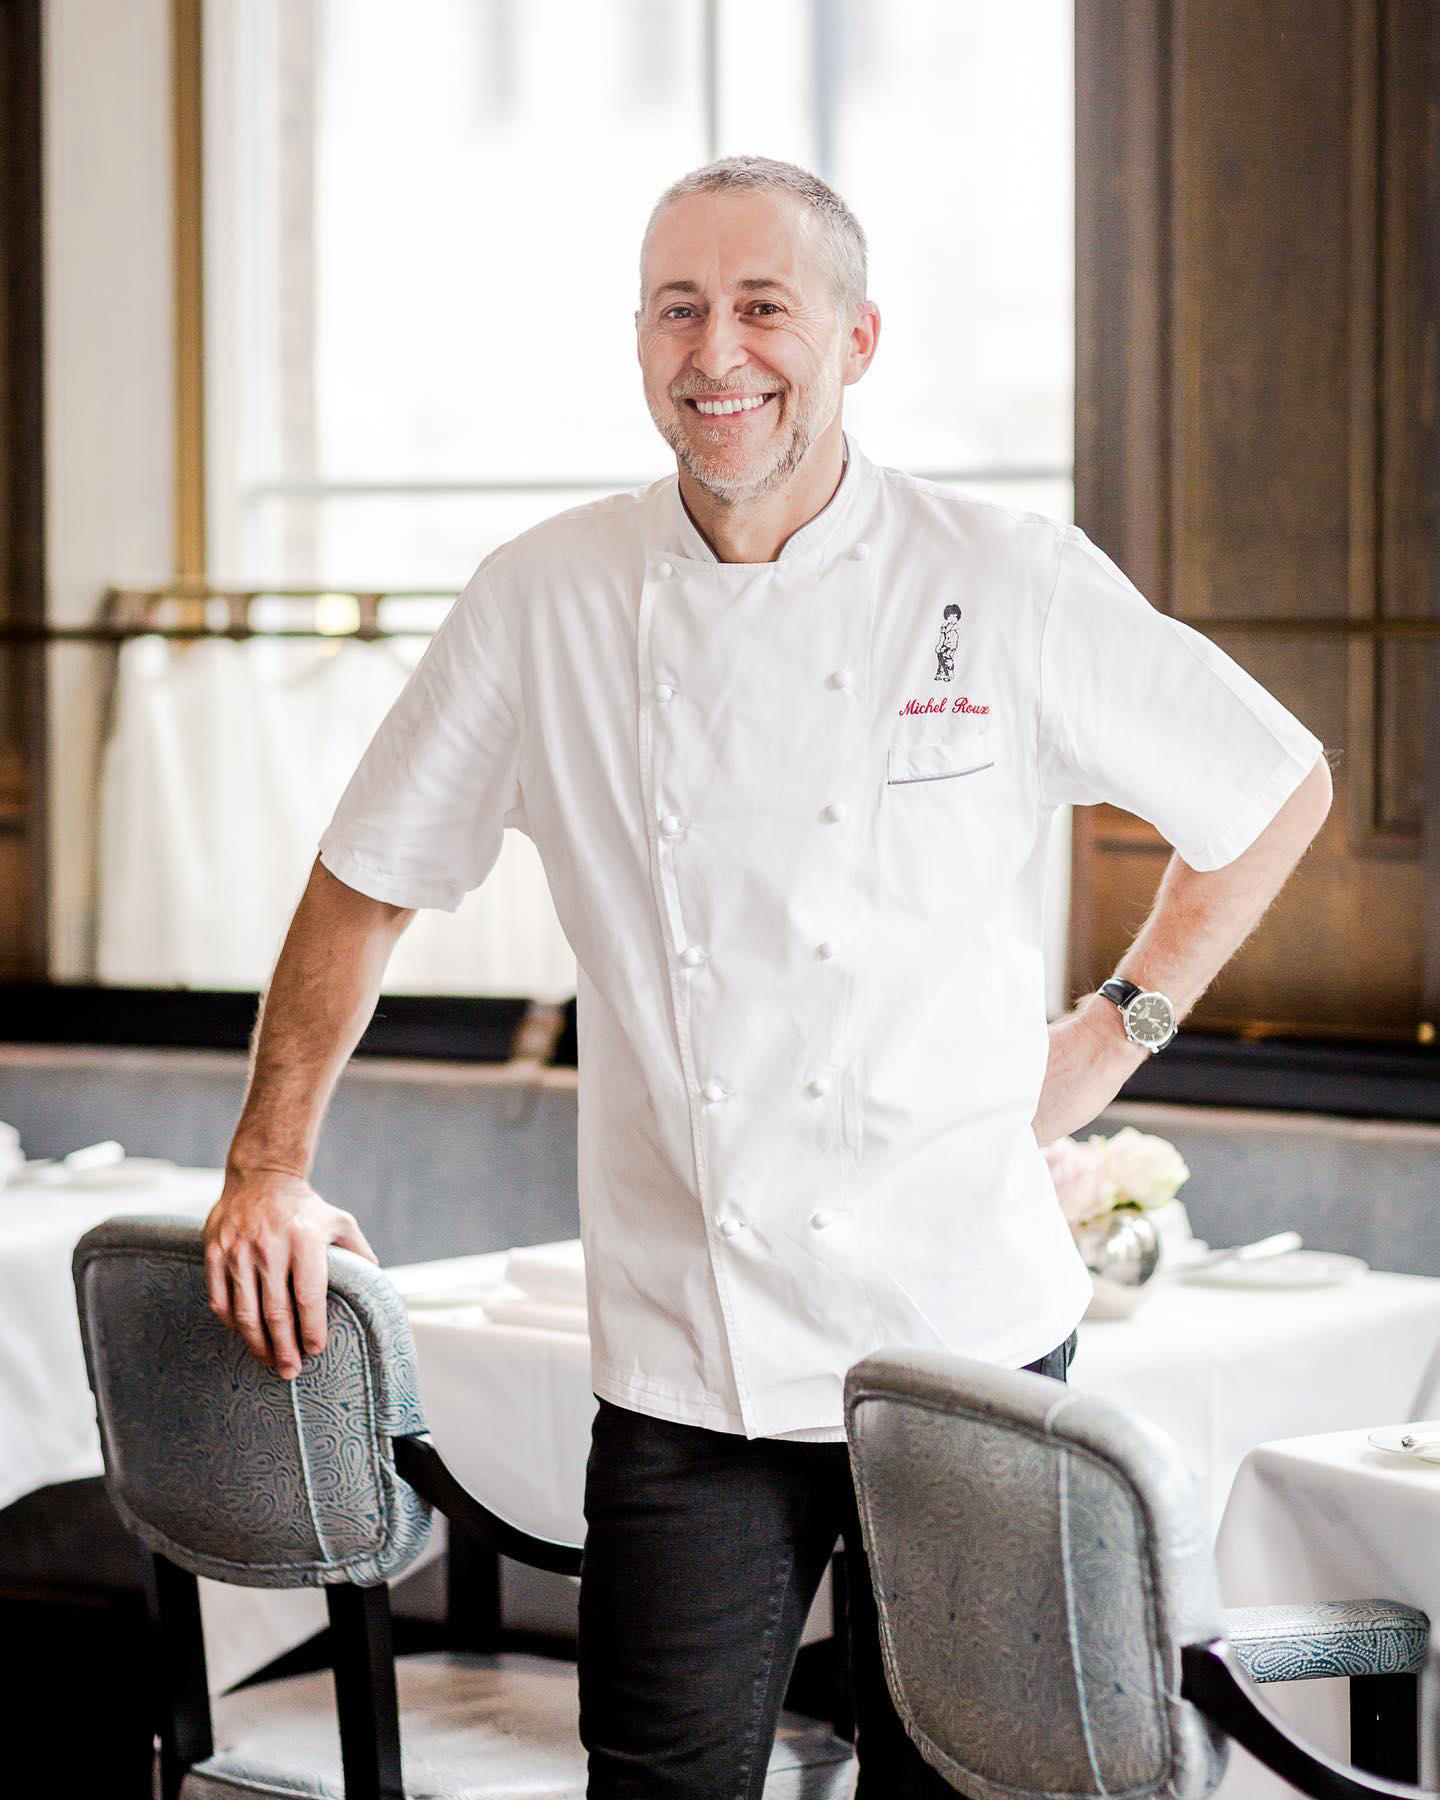 image  1 Roux at The Landau - The team at The Langham, London want to wish Michel Roux Jr